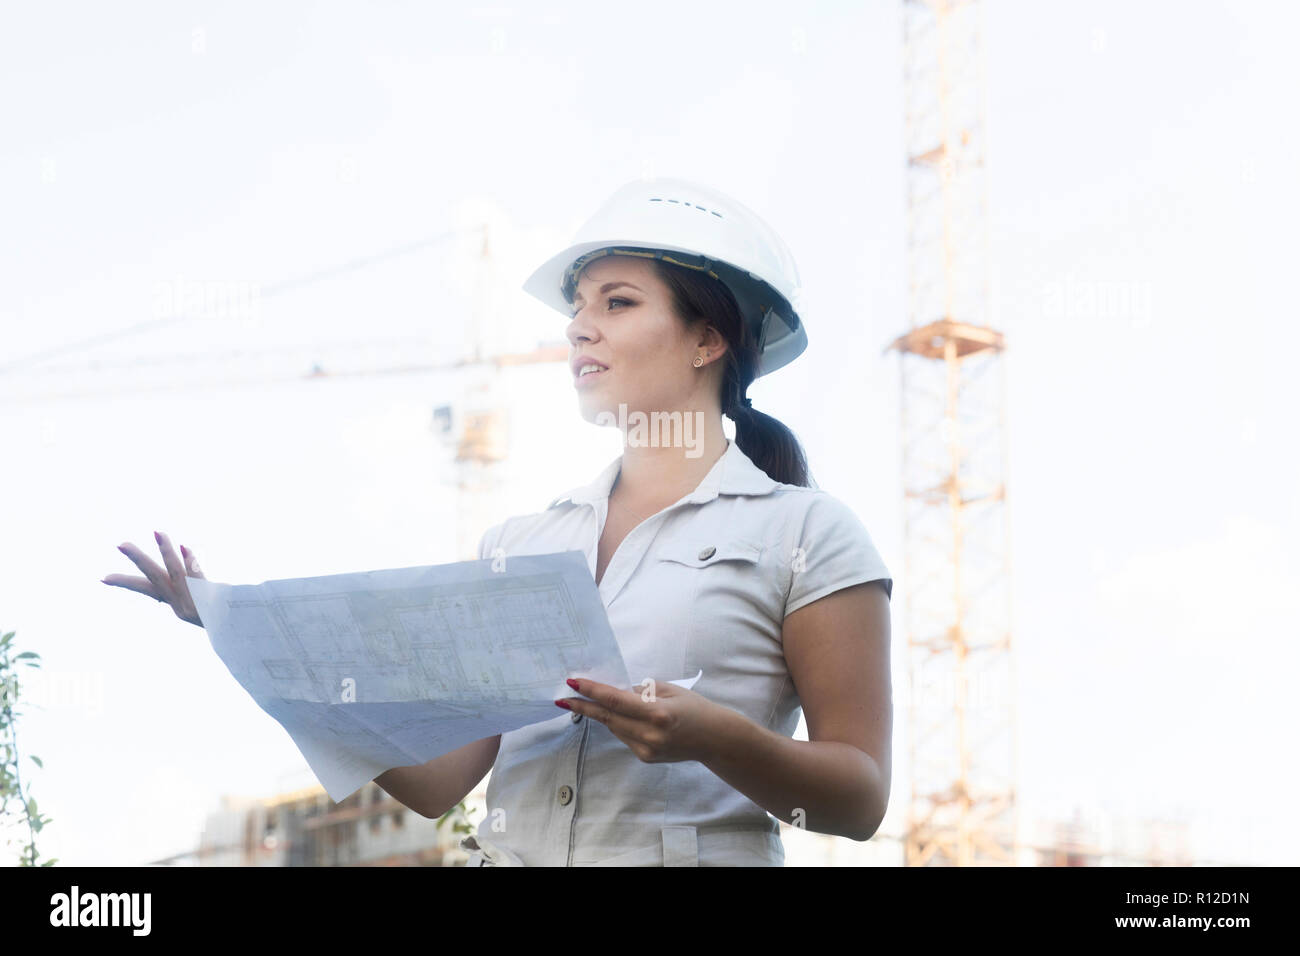 Female engineer at site Stock Photo